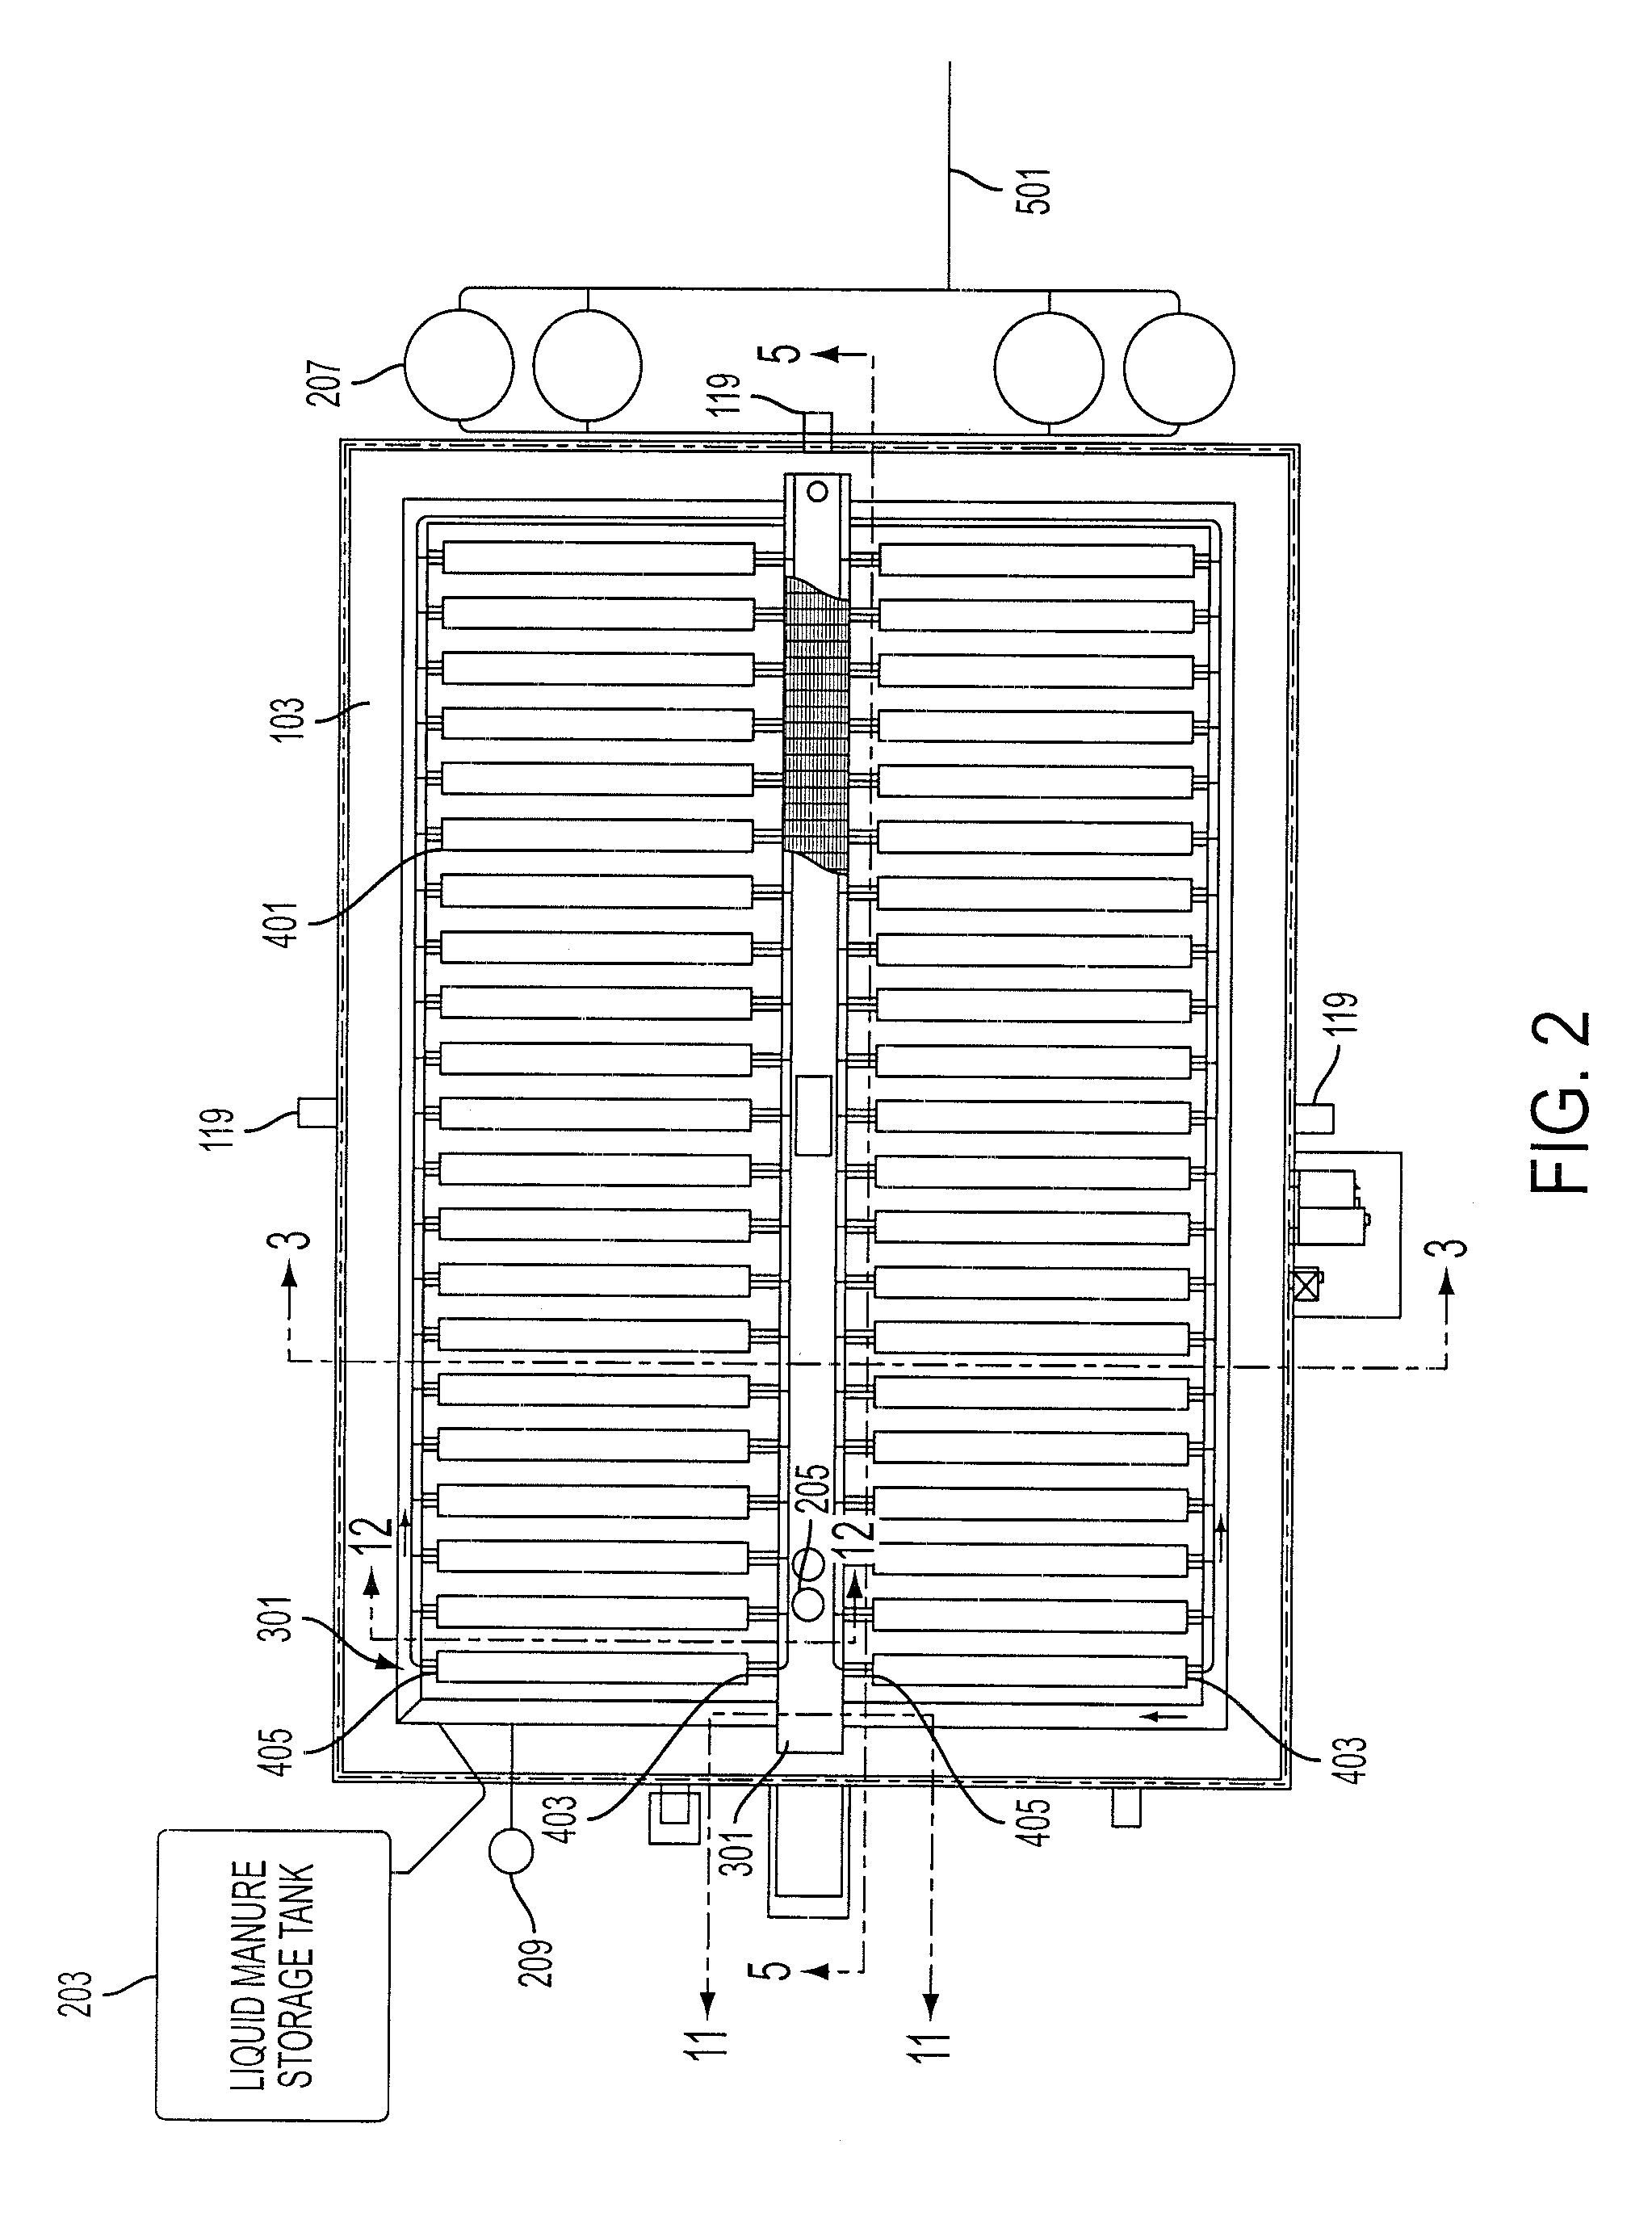 Hydroponic growing enclosure and method for growing, harvesting, processing and distributing algae, related microorganisms and their by products